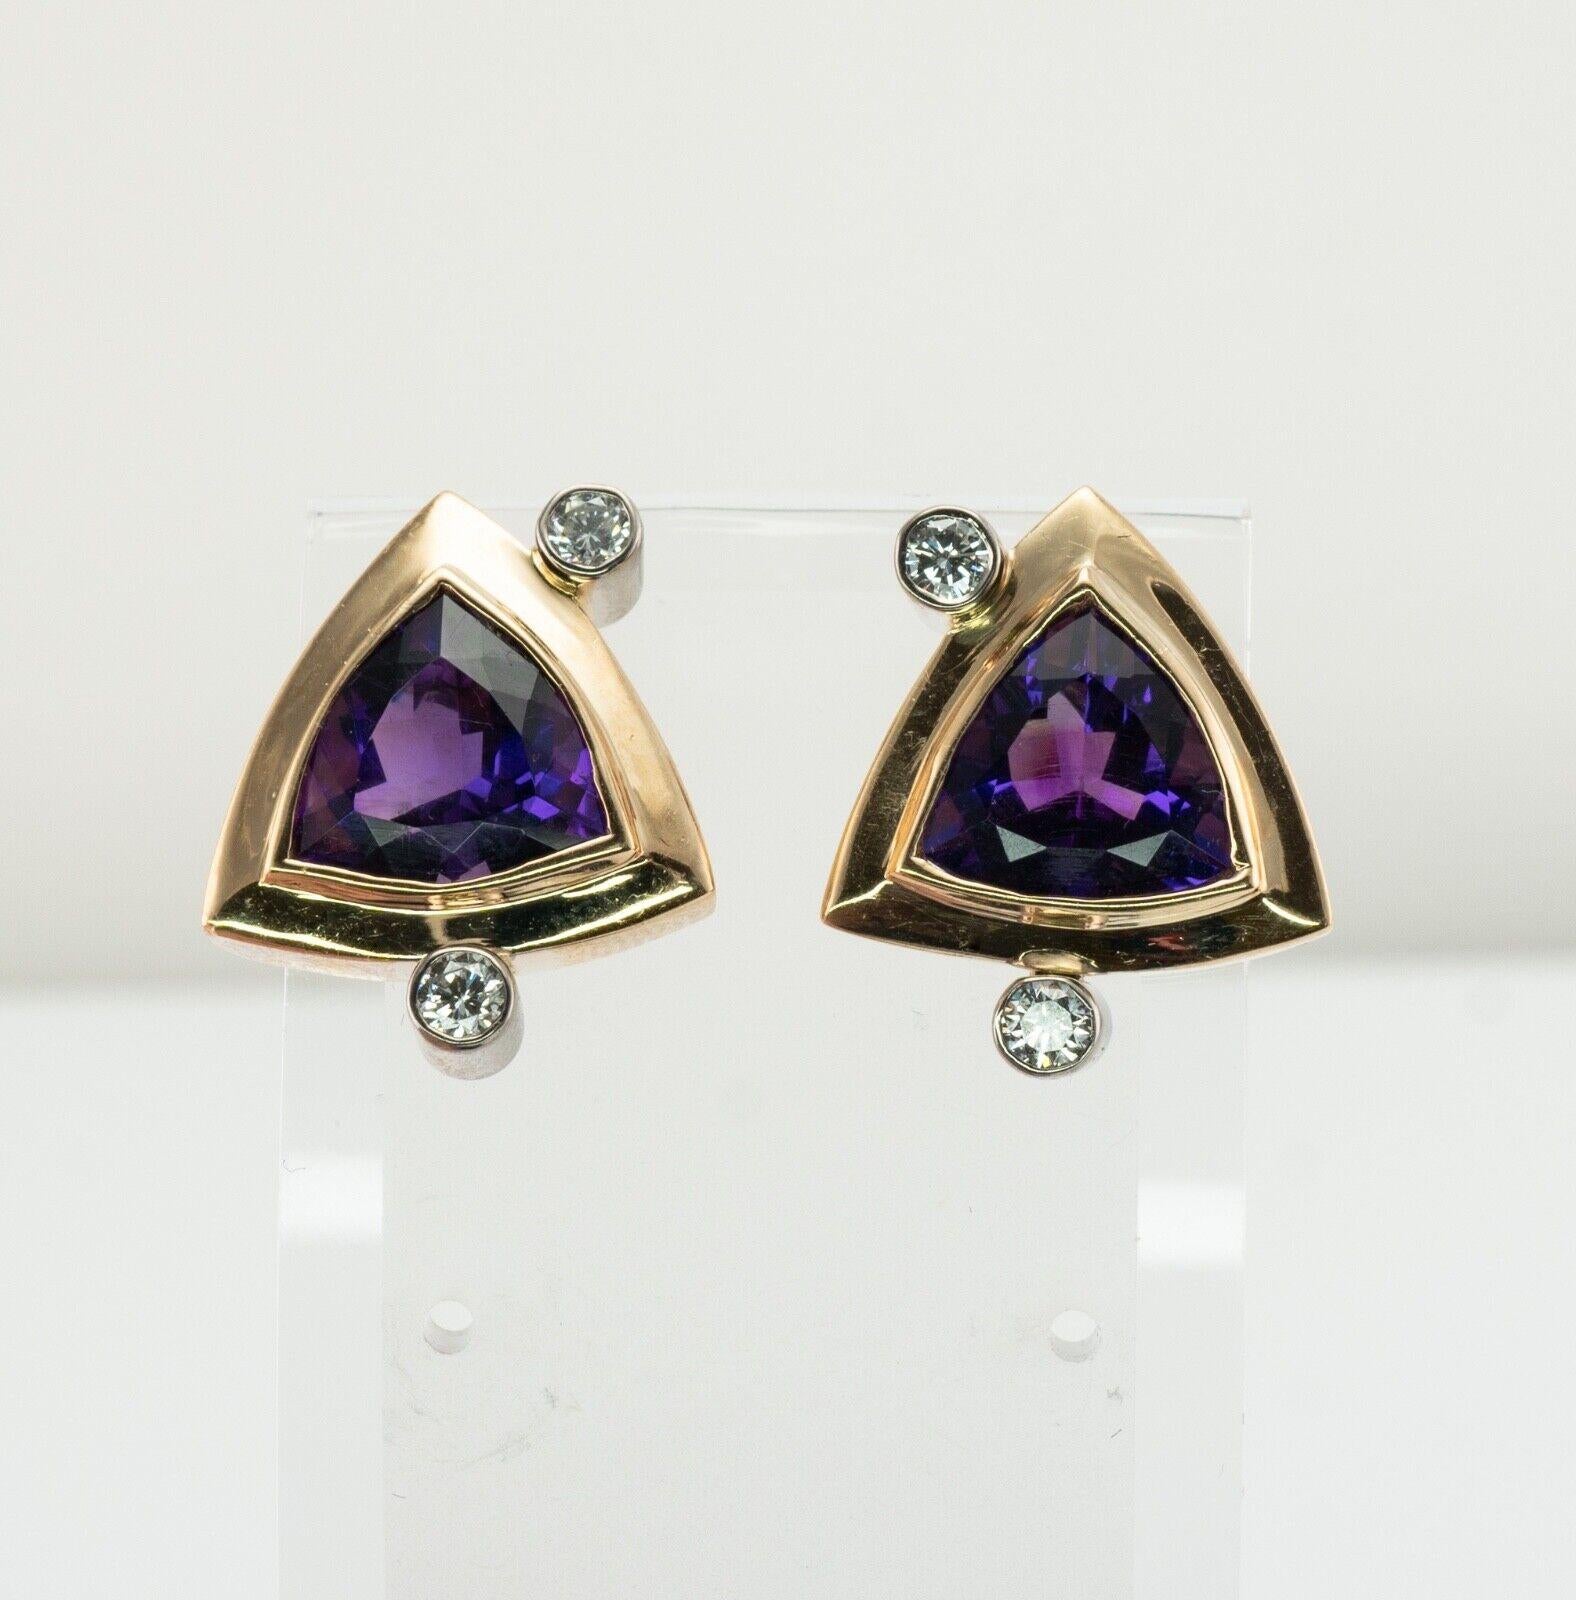 This gorgeous and unusual estate pair of earrings is crafted in solid 14K Yellow gold (carefully tested and guaranteed), and set with genuine Earth mind gemstones: Amethyst and Diamonds. Each trillion cut amethyst measures 9mm (2.20 carats each.